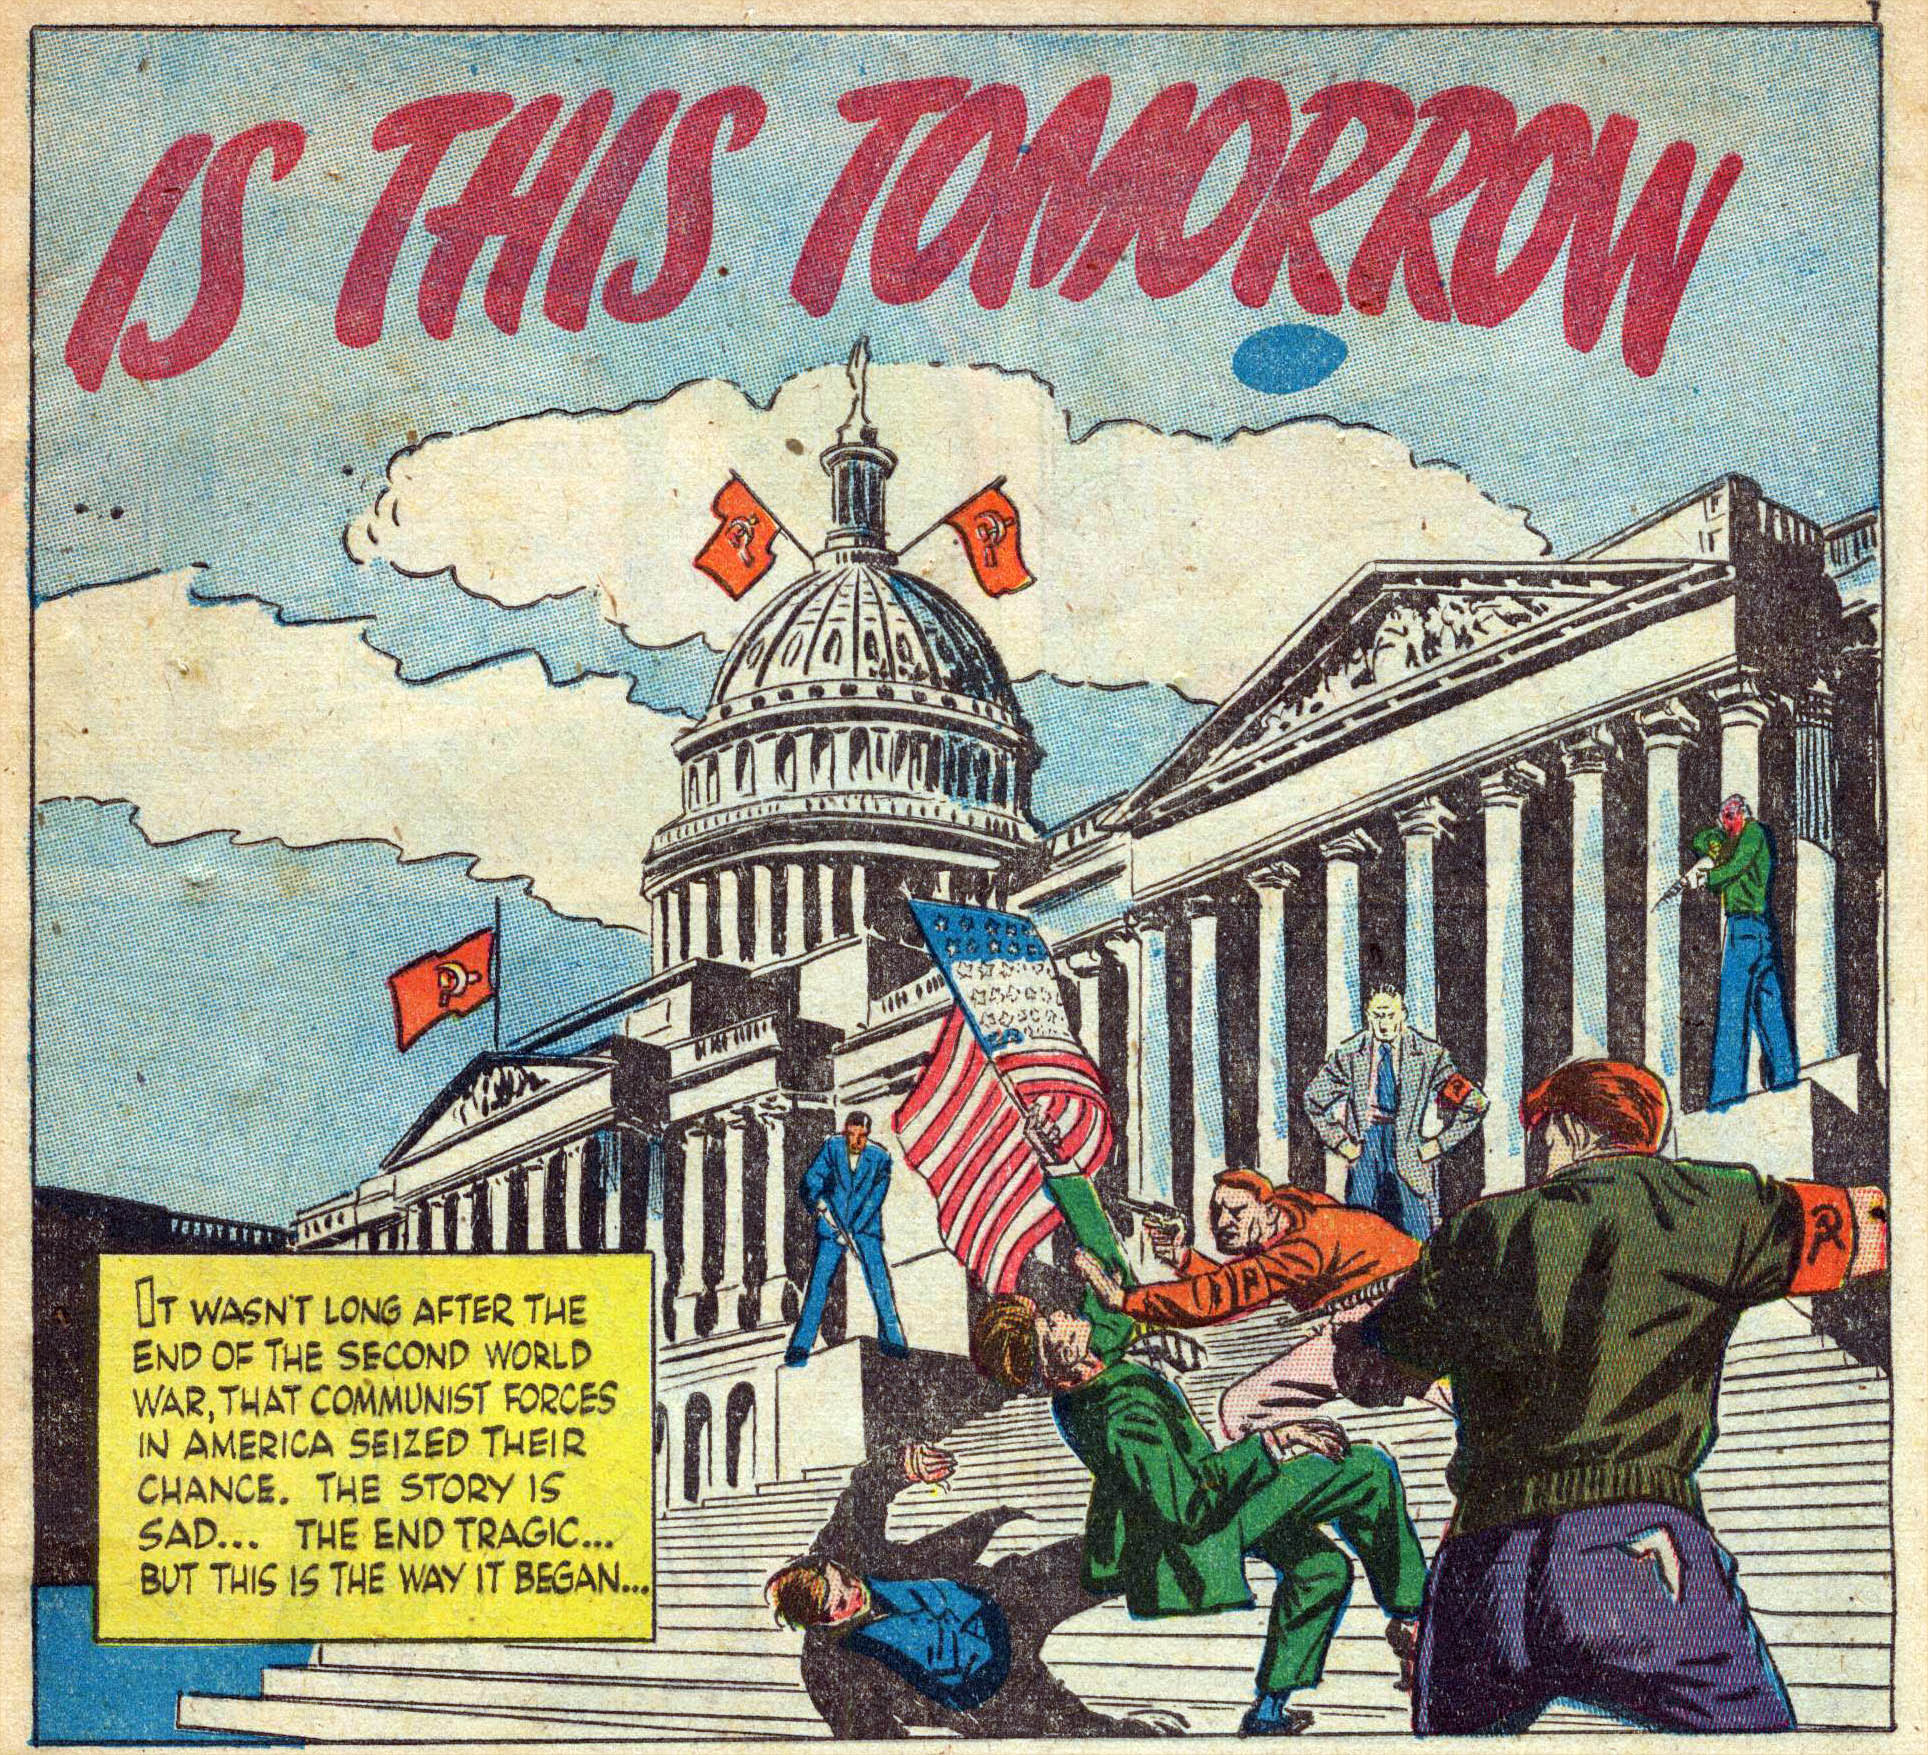 Is This Tomorrow? A Red Scare Comic Book from 1947 - Flashbak